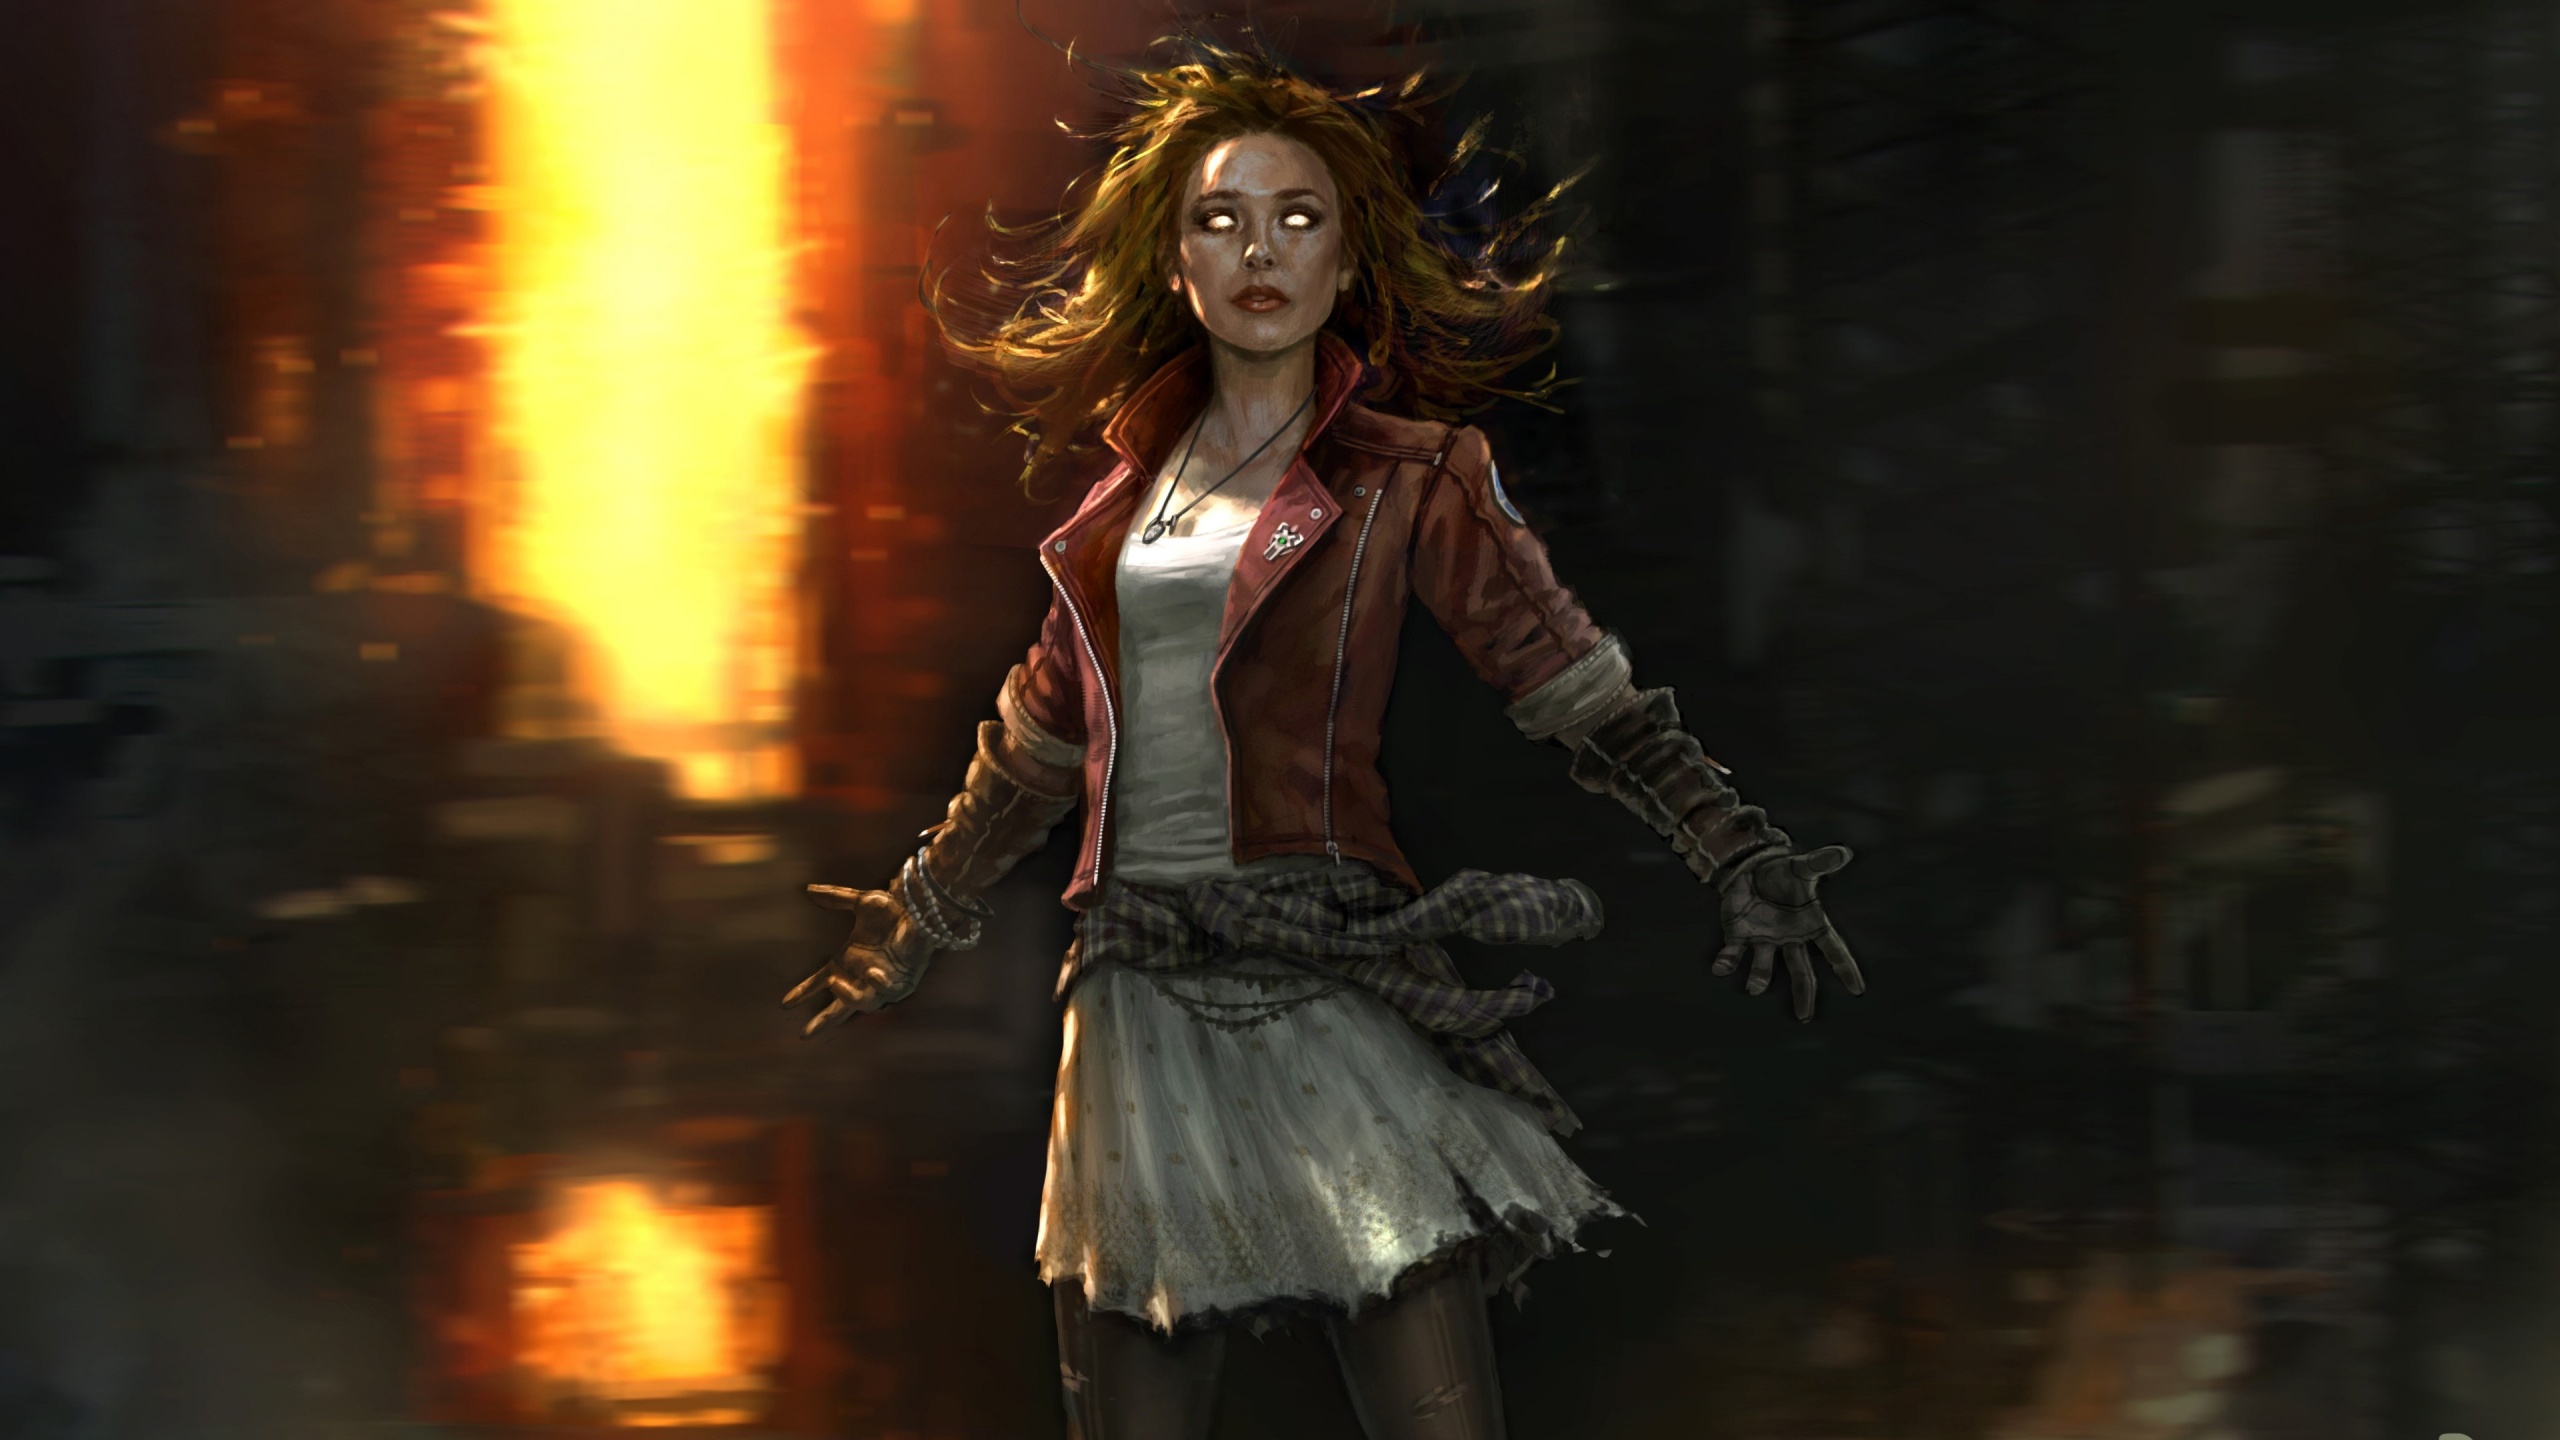 Scarlet Witch Avengers 2 wallpaper   1370327